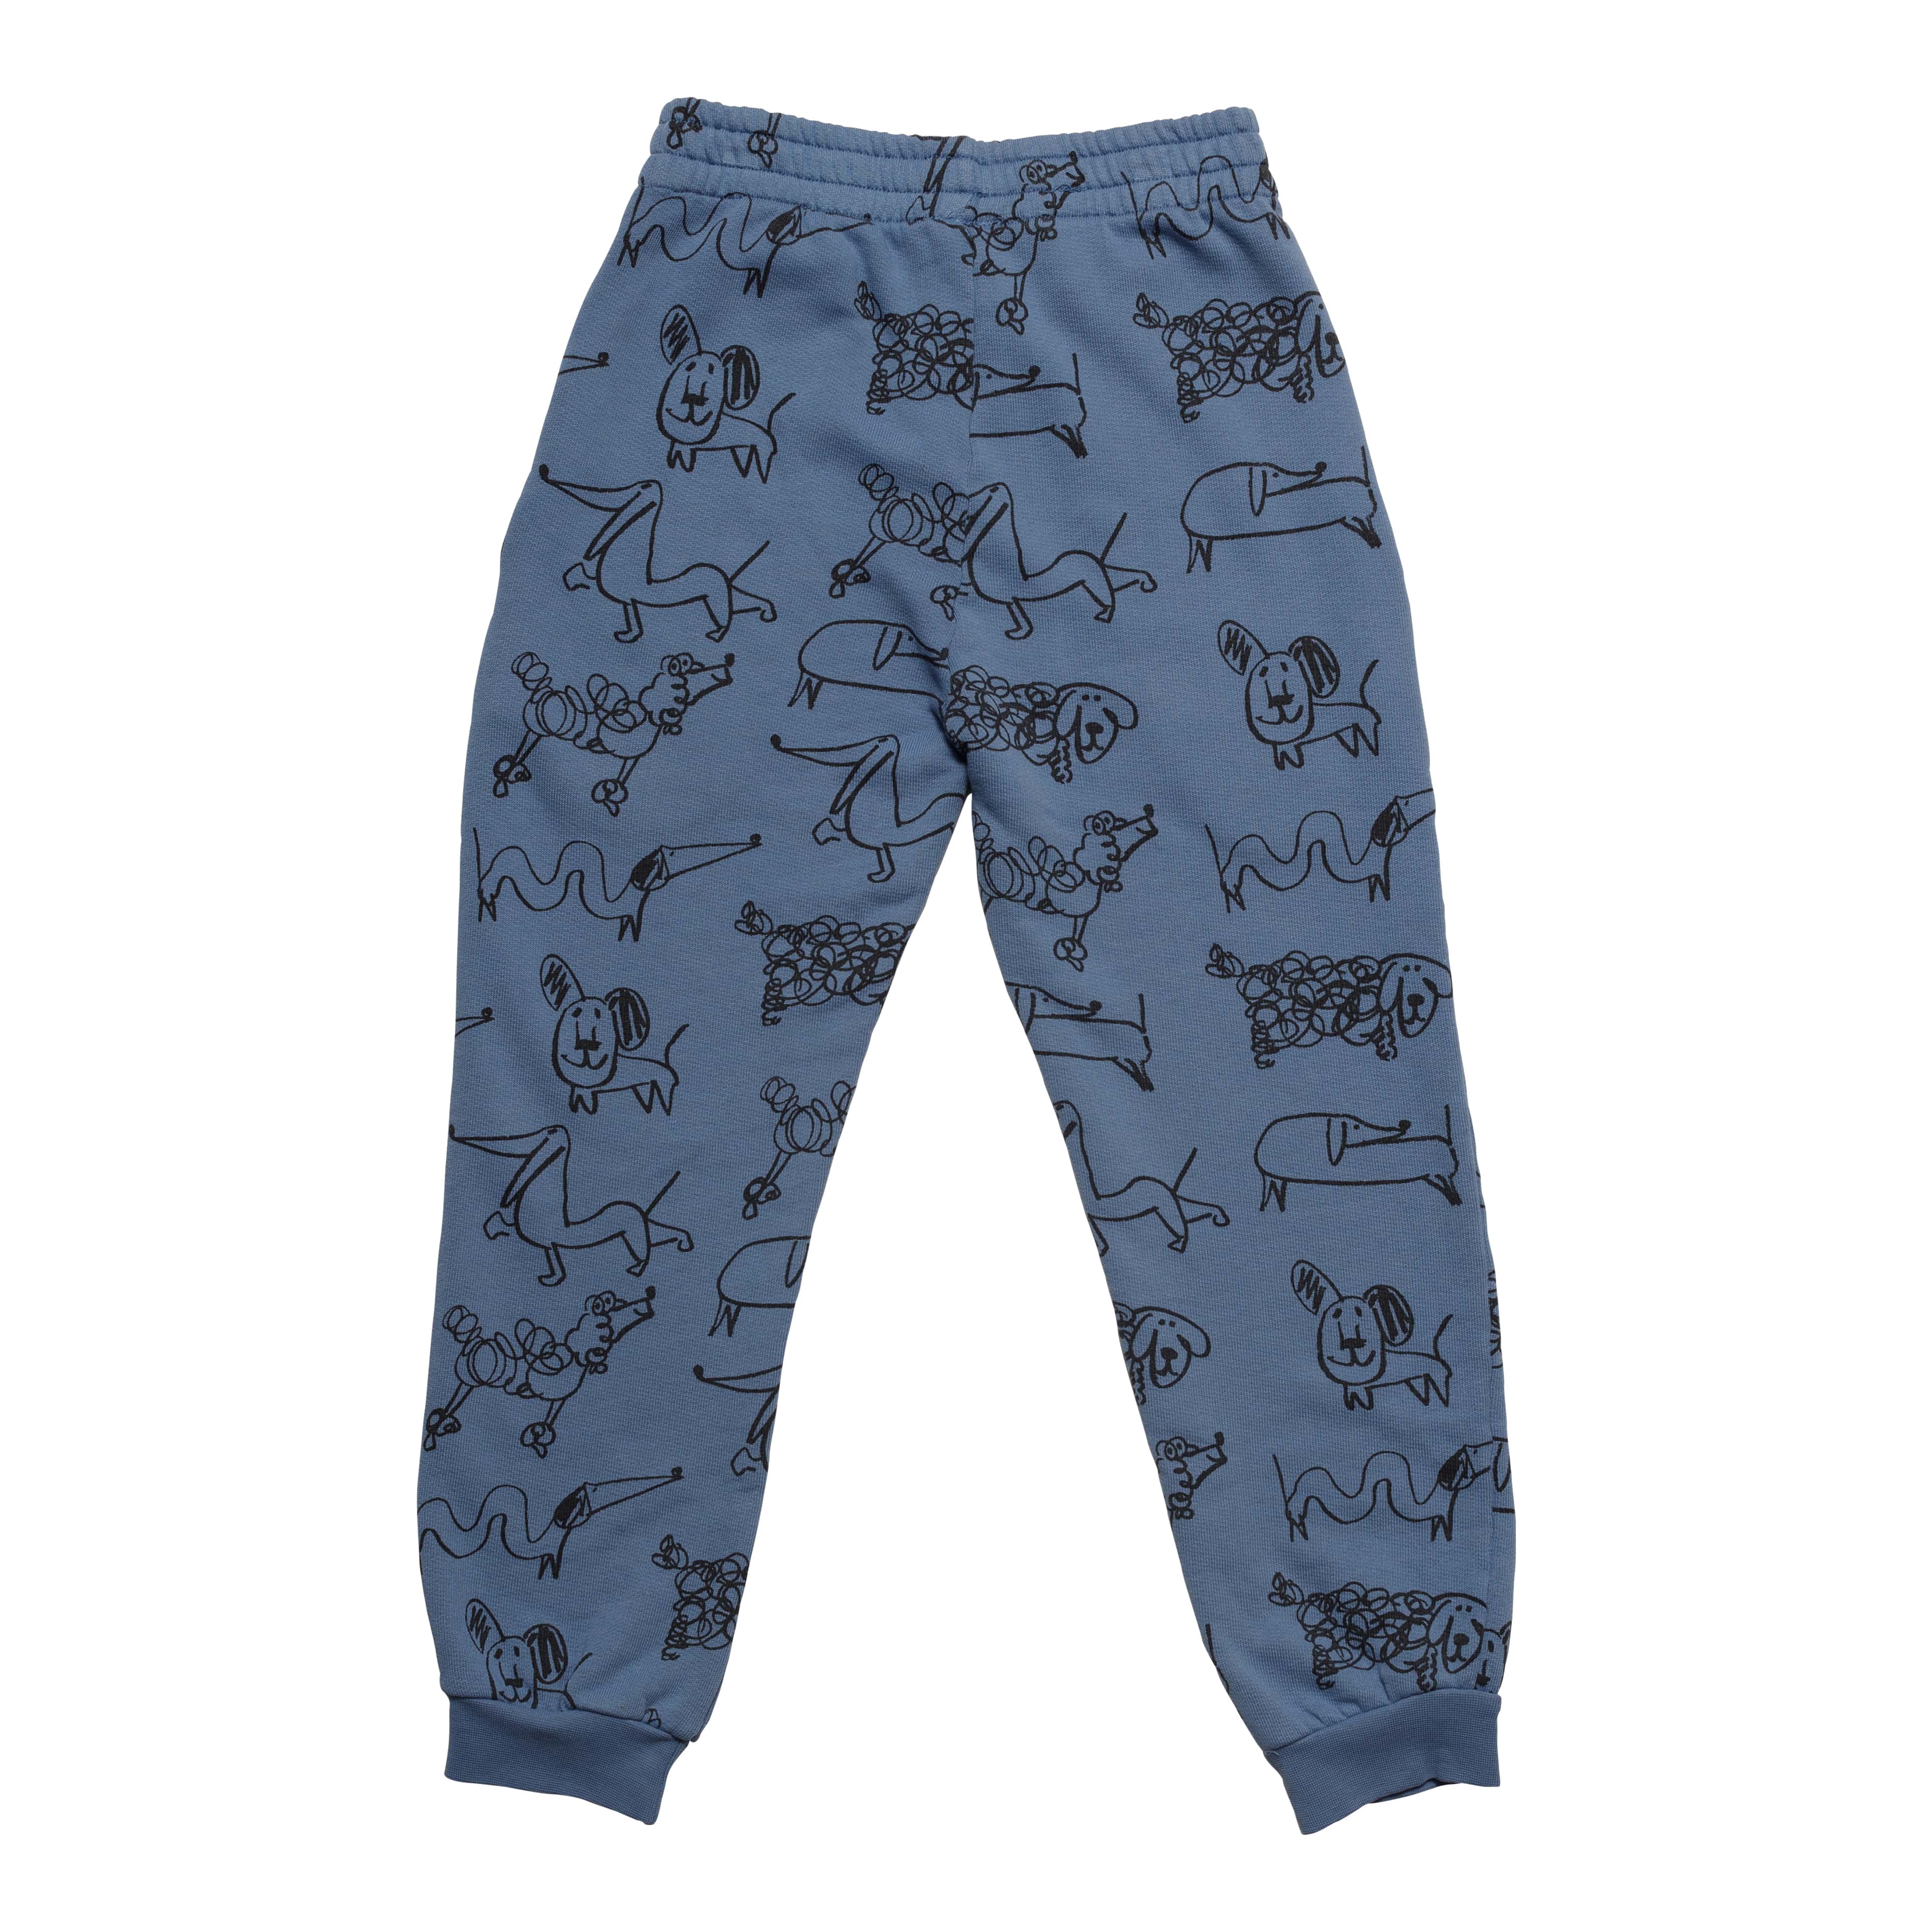 Boys & Girls Blue Printed Cotton Trousers